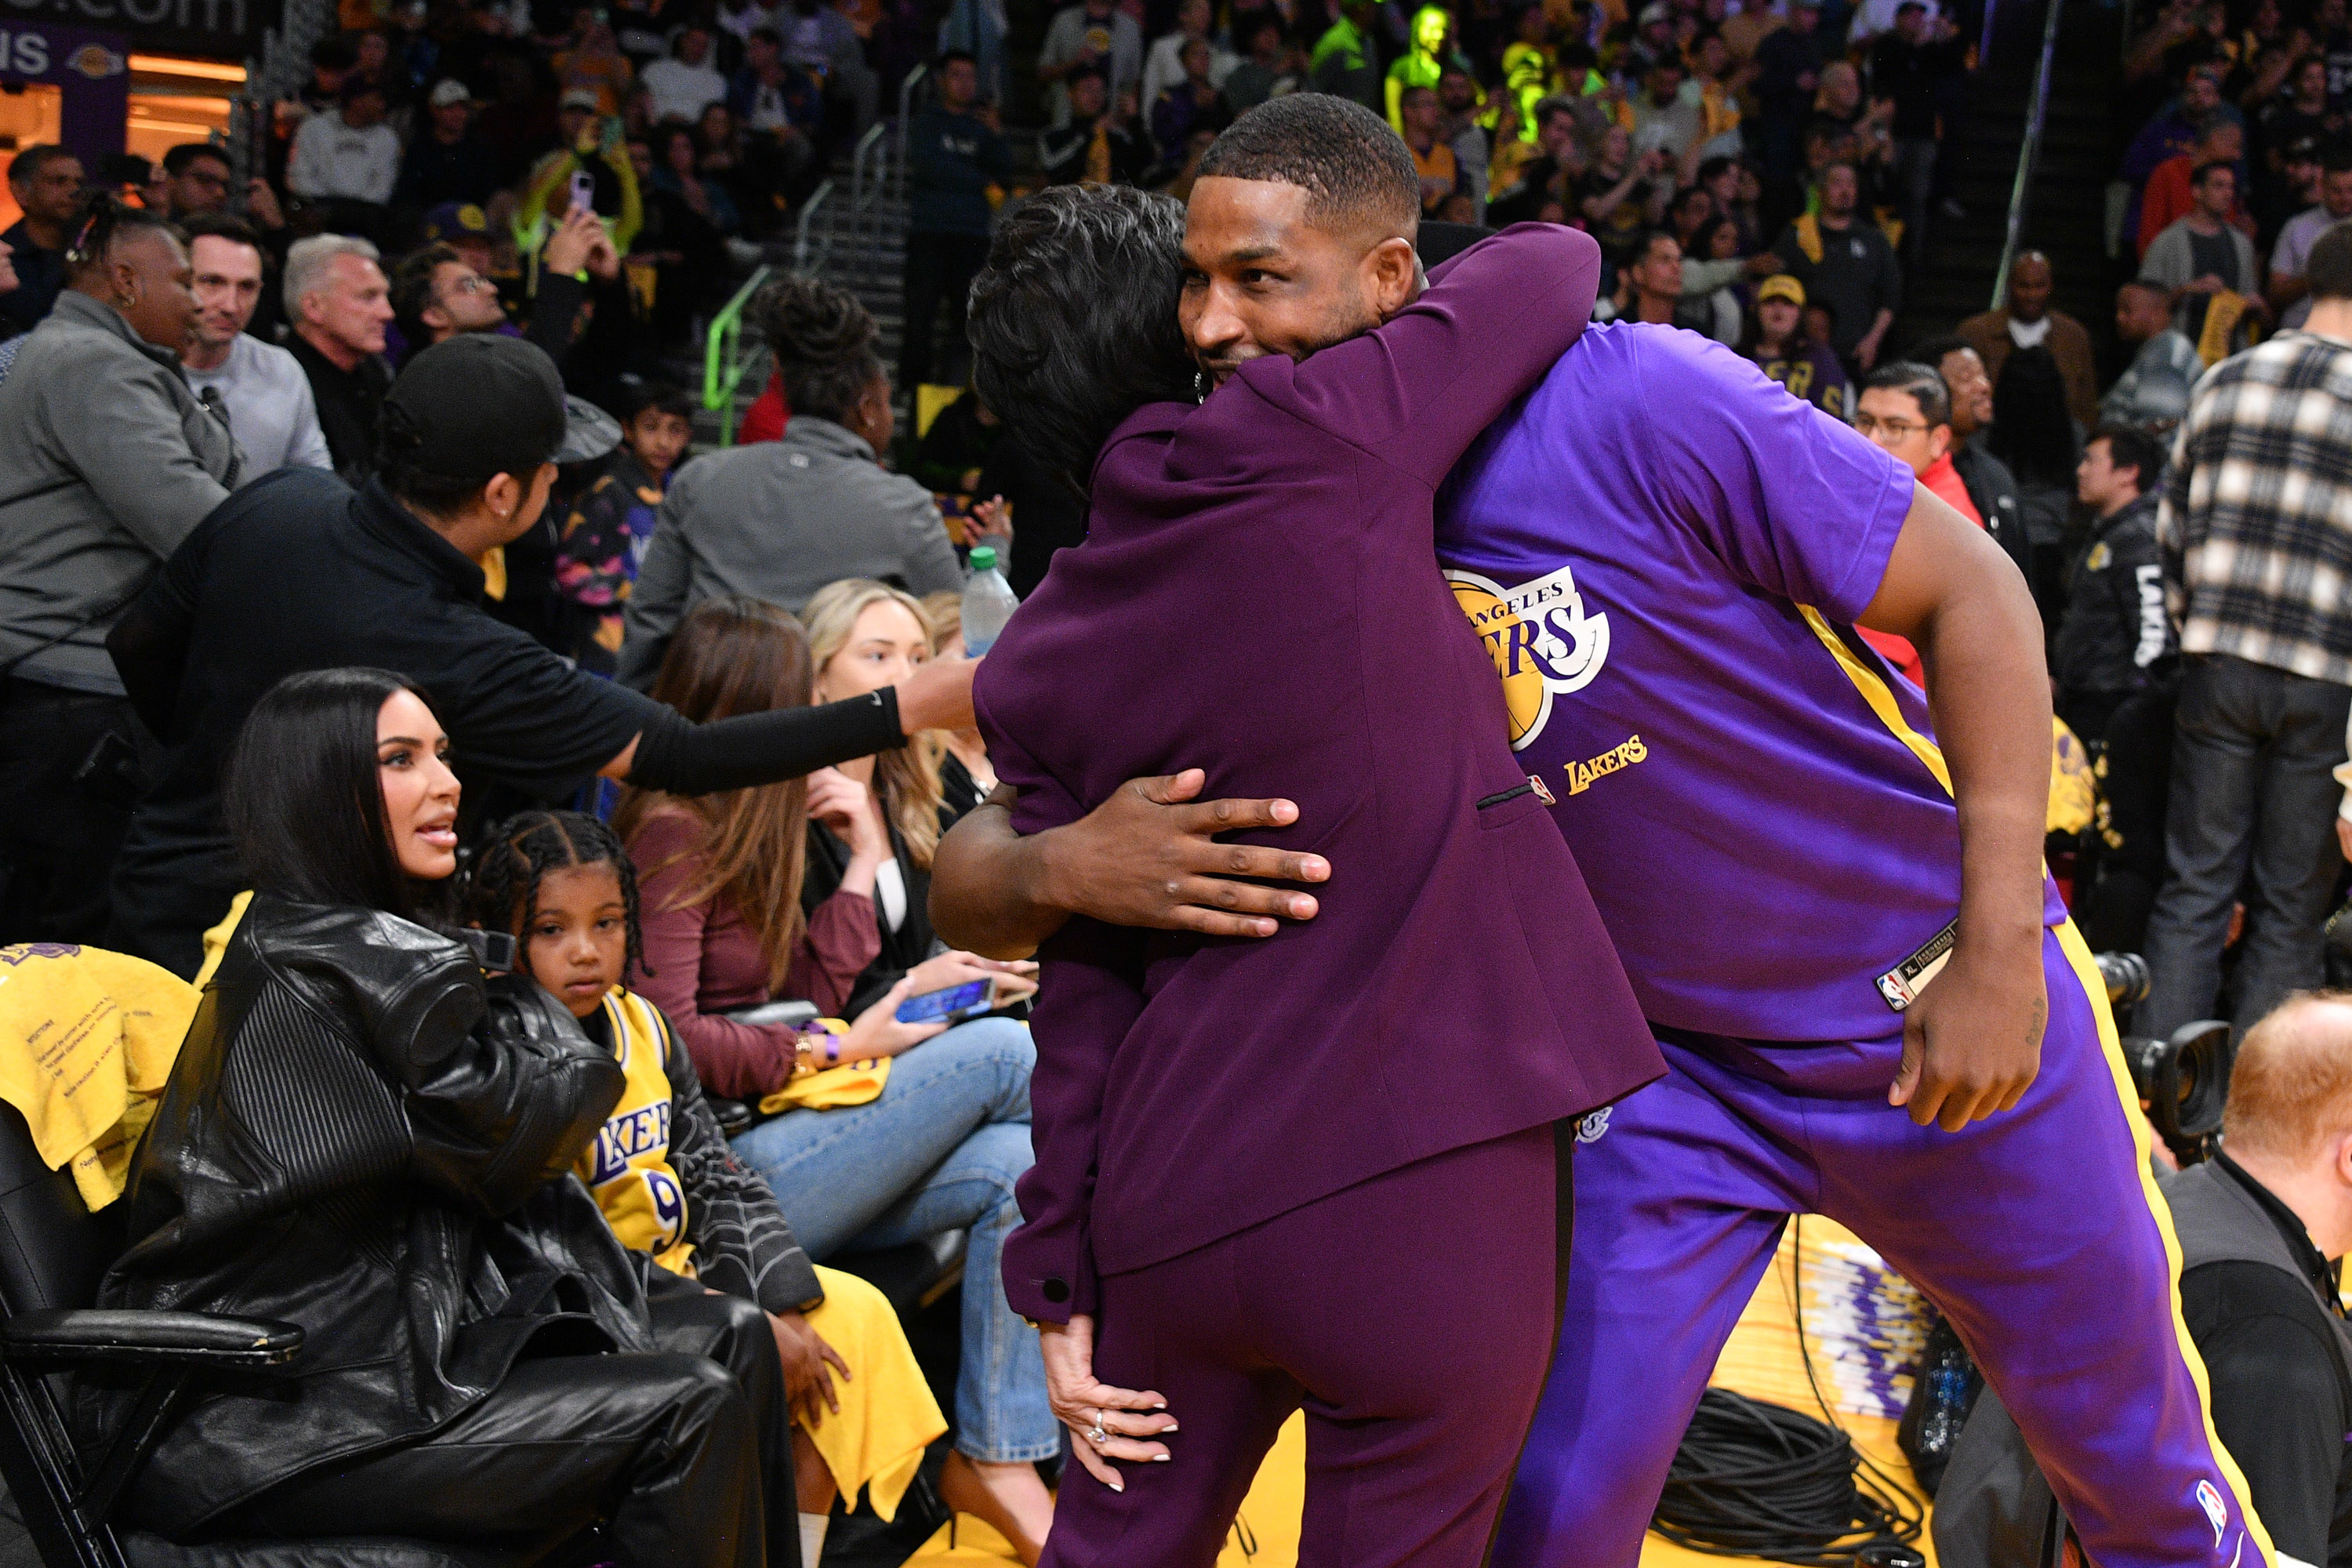 kris and tristan hugging courtside